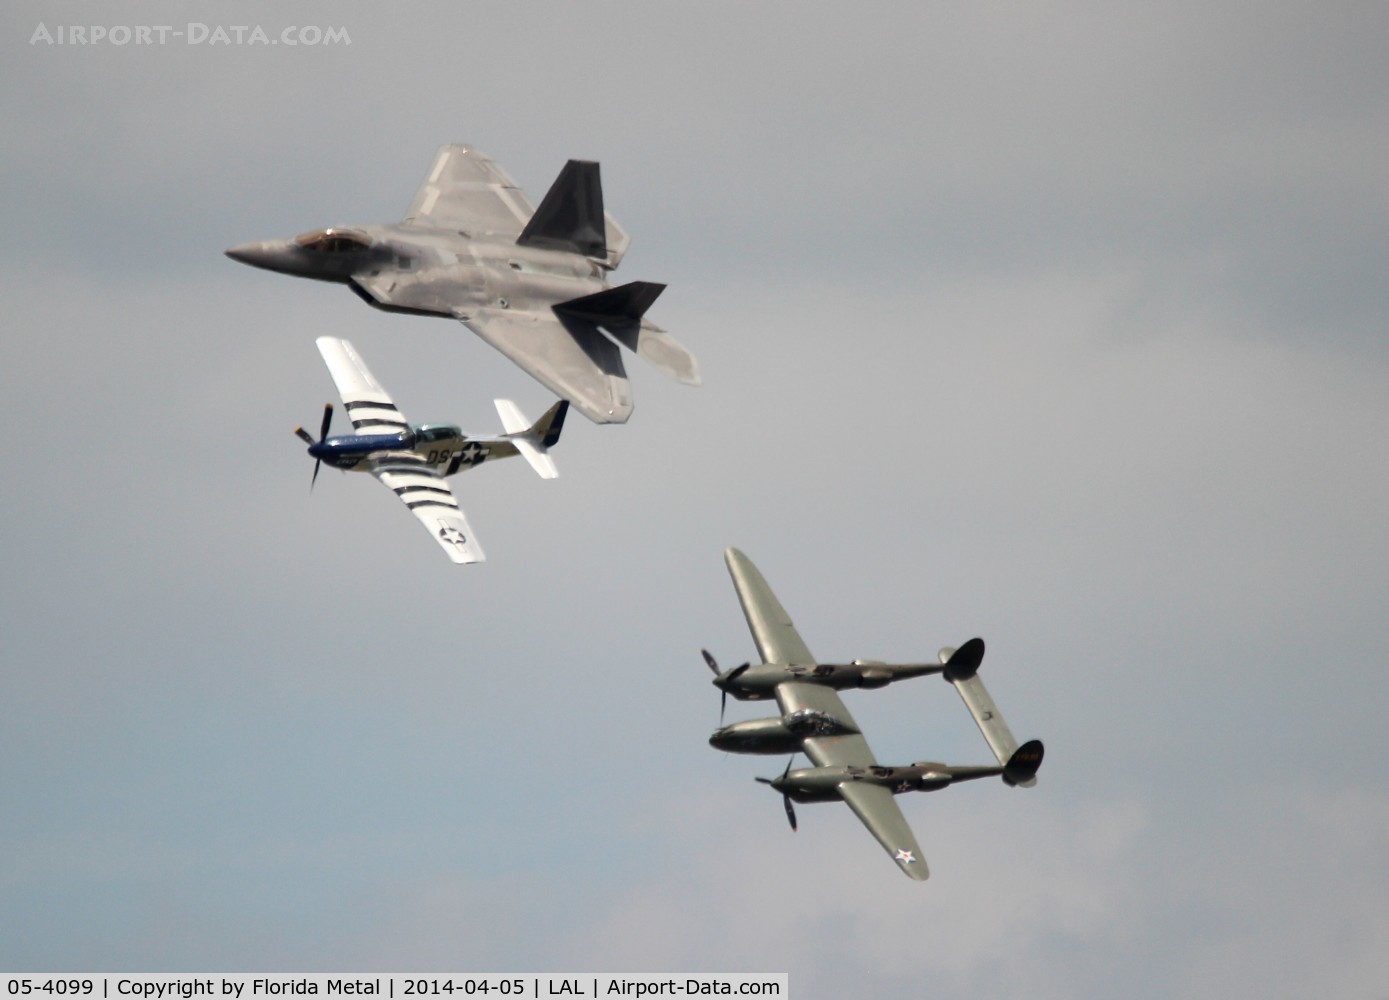 05-4099, 2005 Lockheed Martin F-22A Raptor C/N 645-4099, Heritage flight with P-51 Crazy Horse and P-38 Glacier Girl